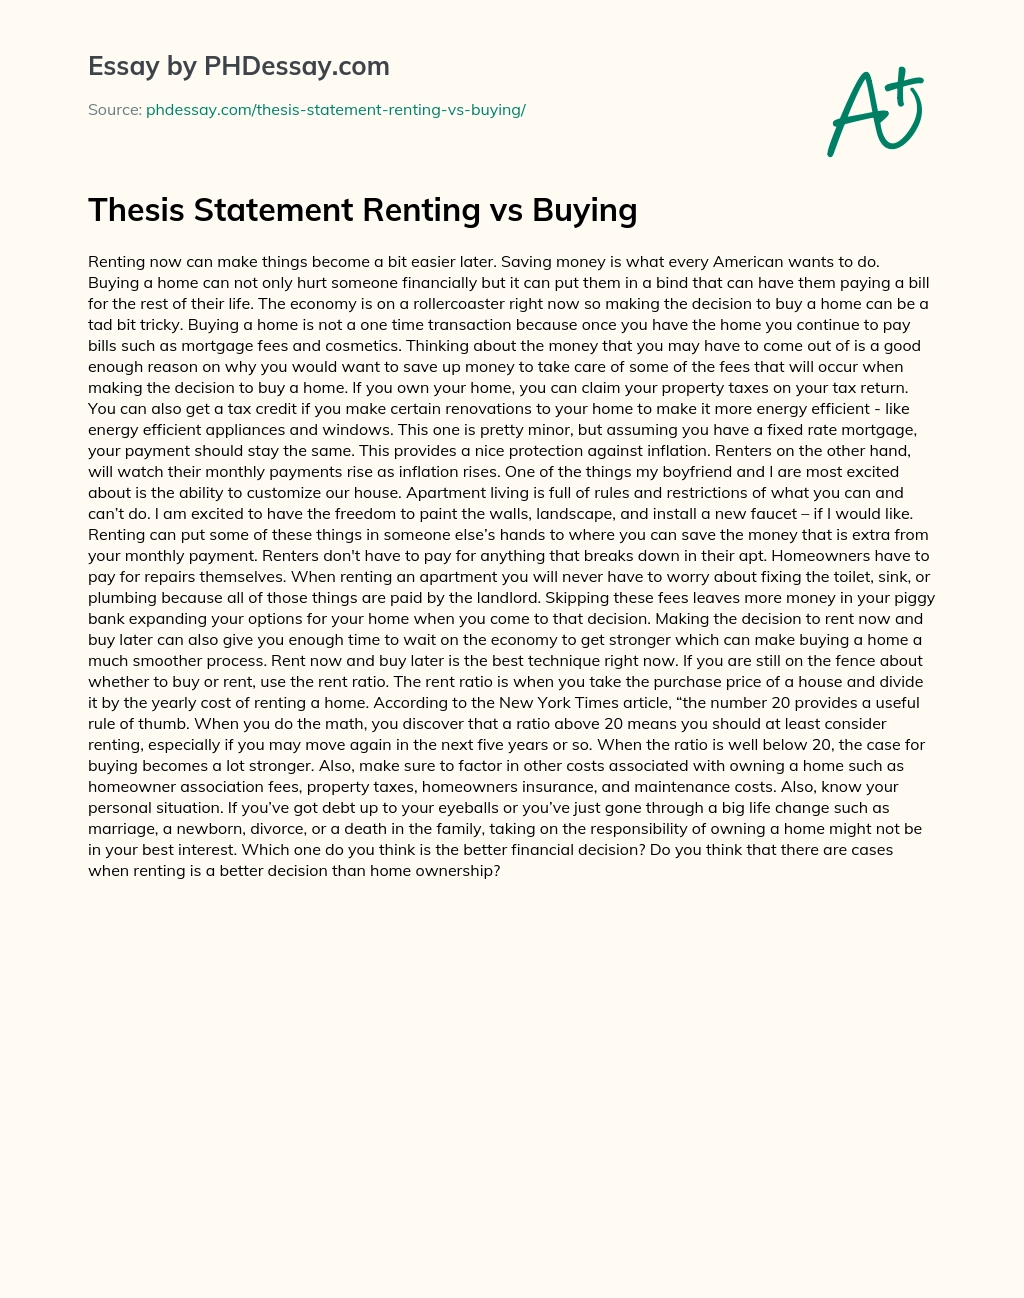 Essays On Renting Vs Buying A Home